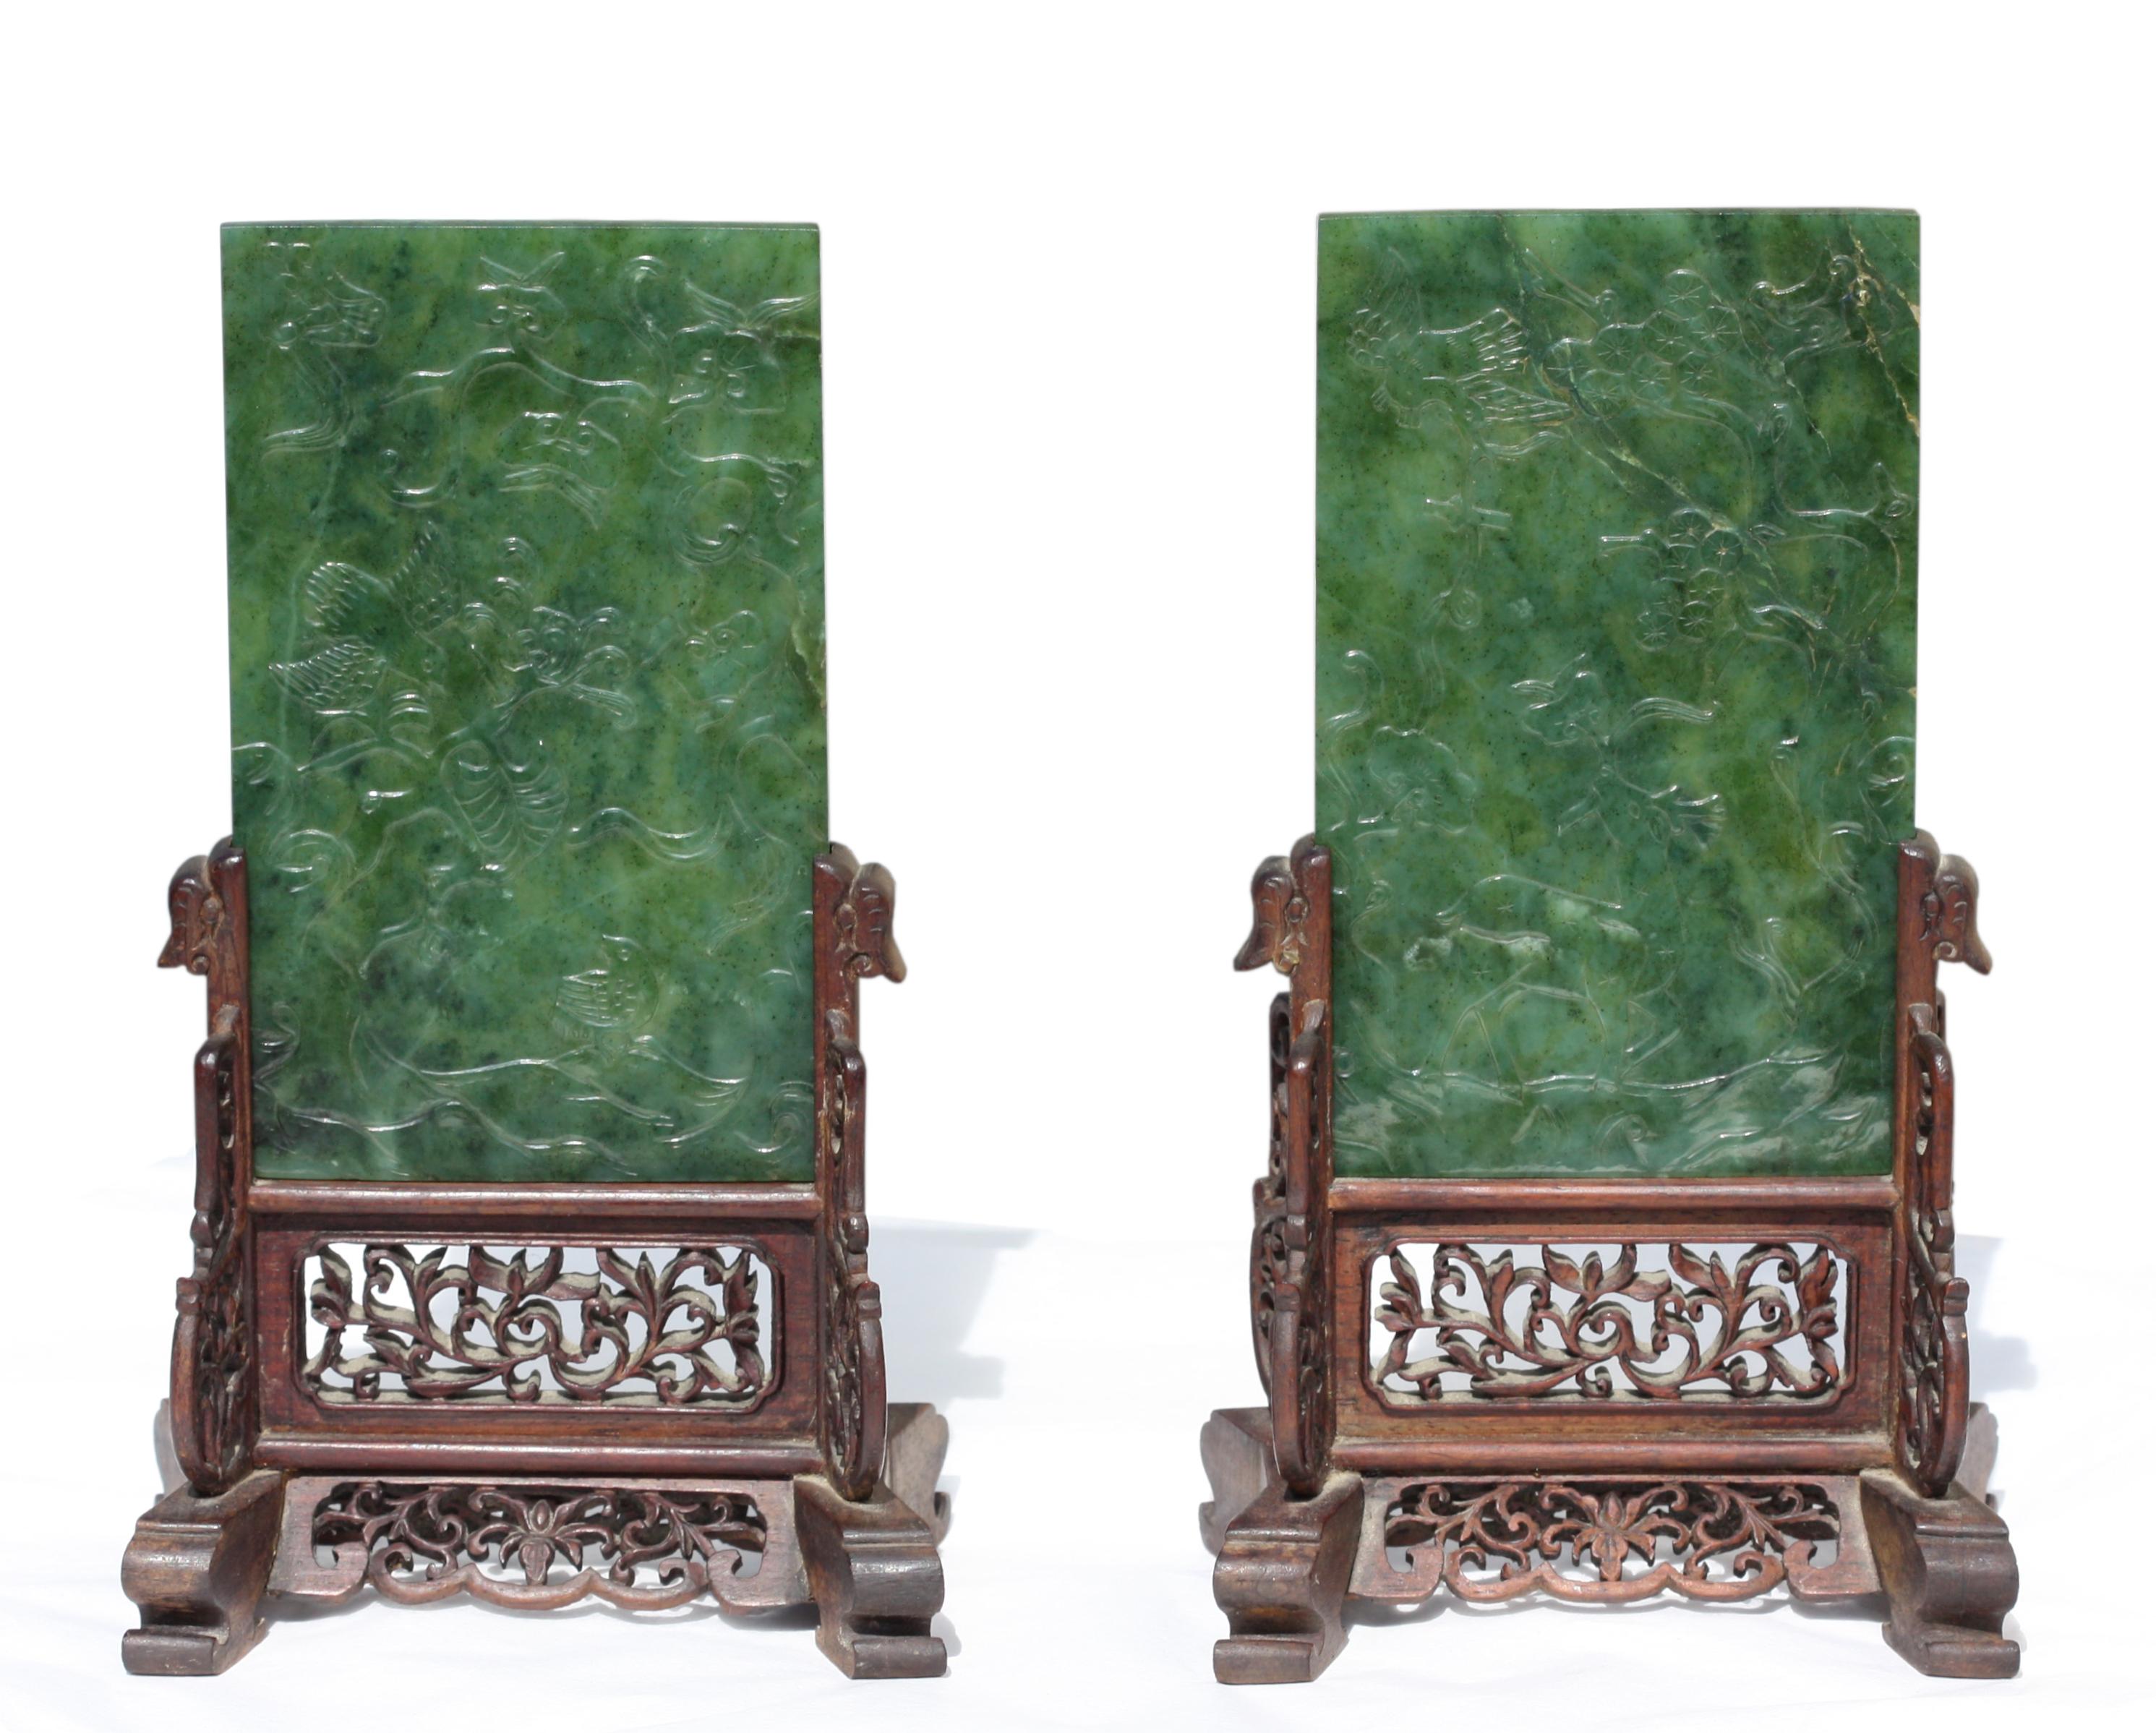  A Pair of Spinach-green Jade 